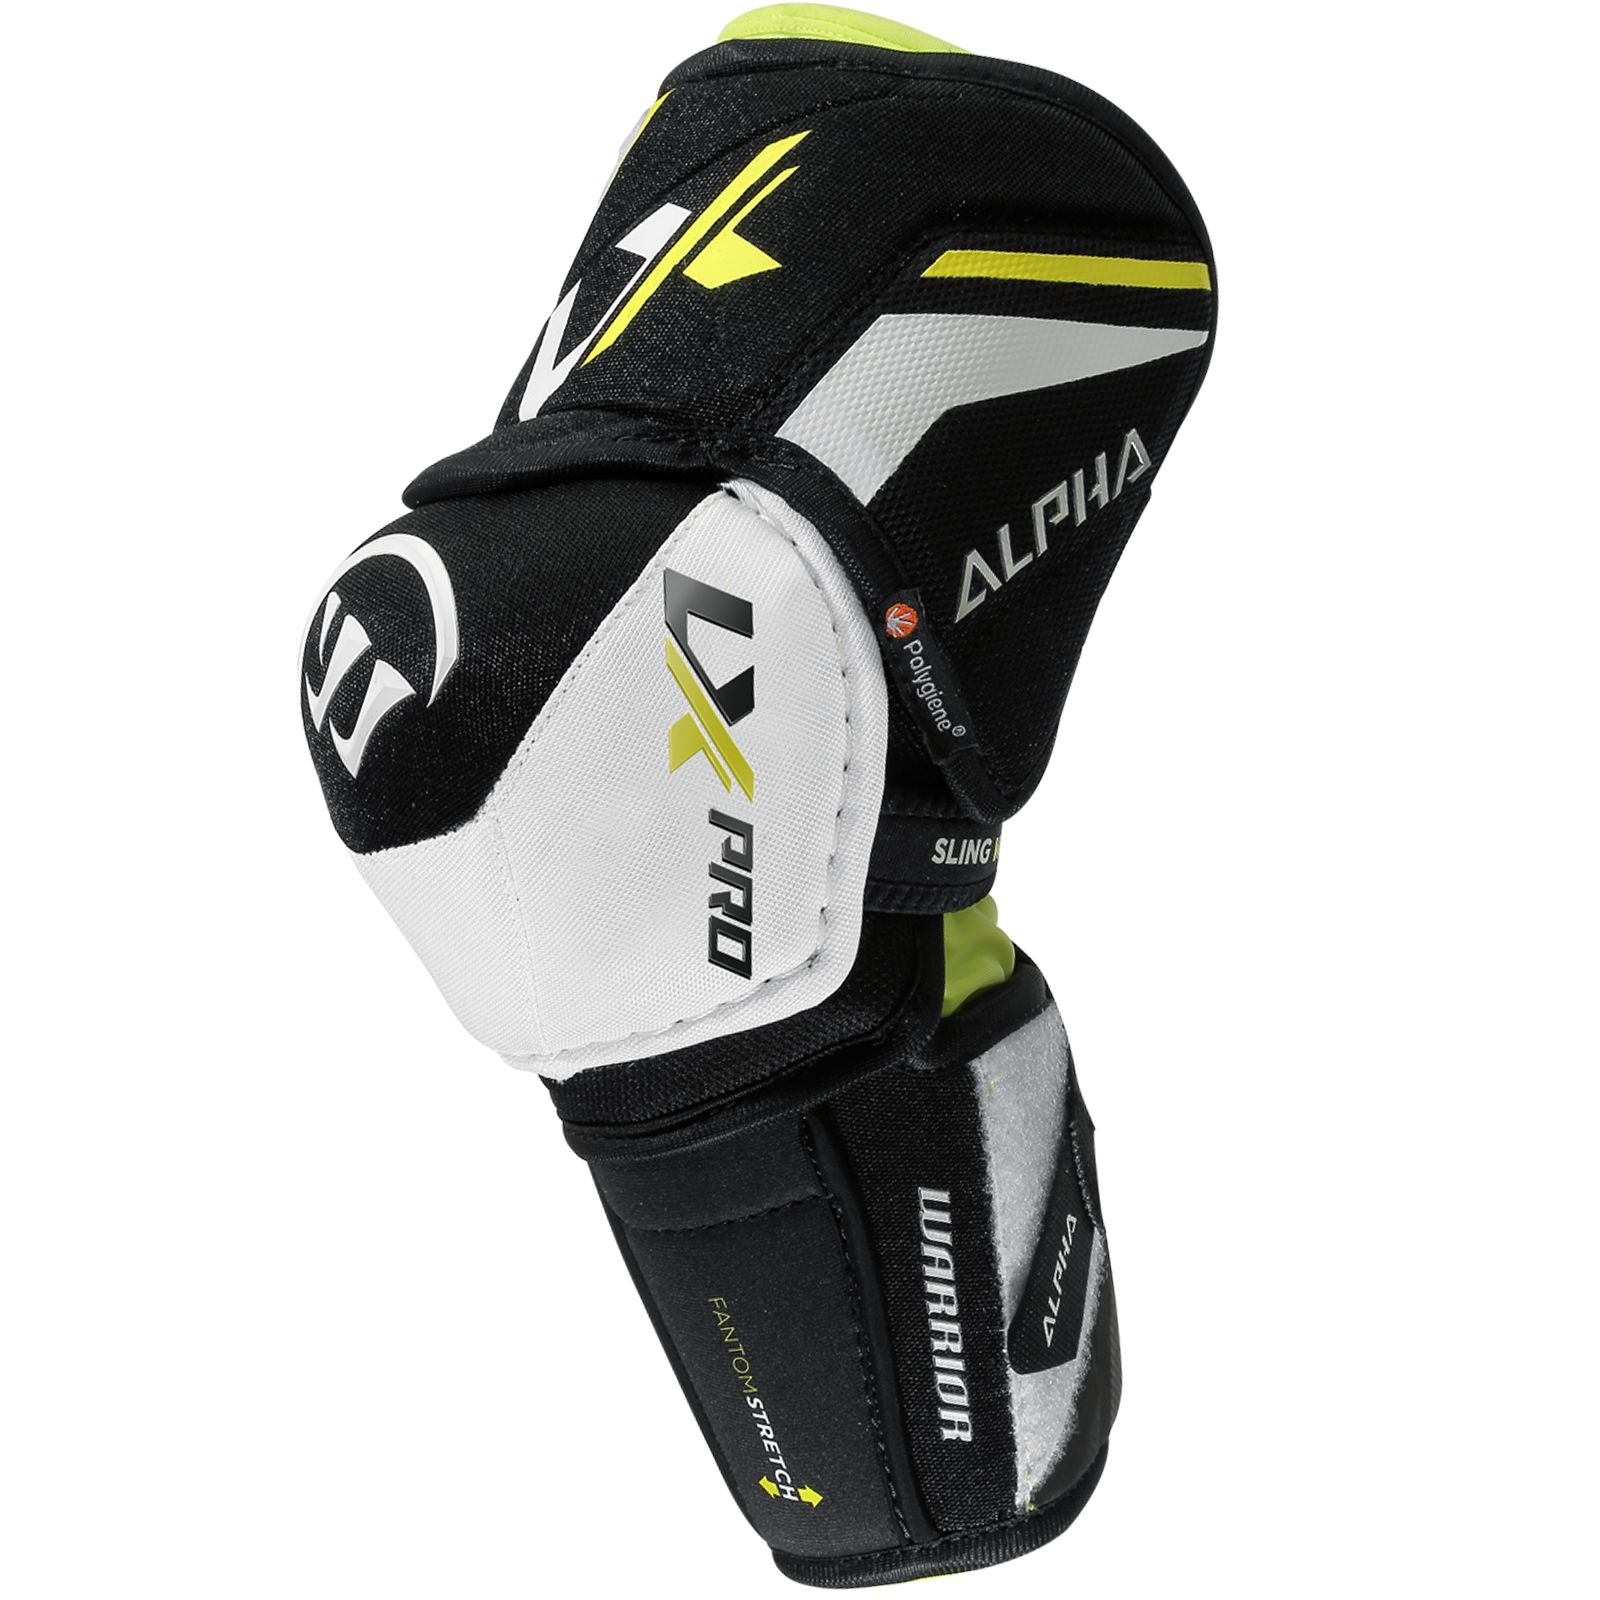 LX Pro Elbow Pad,  image number 0